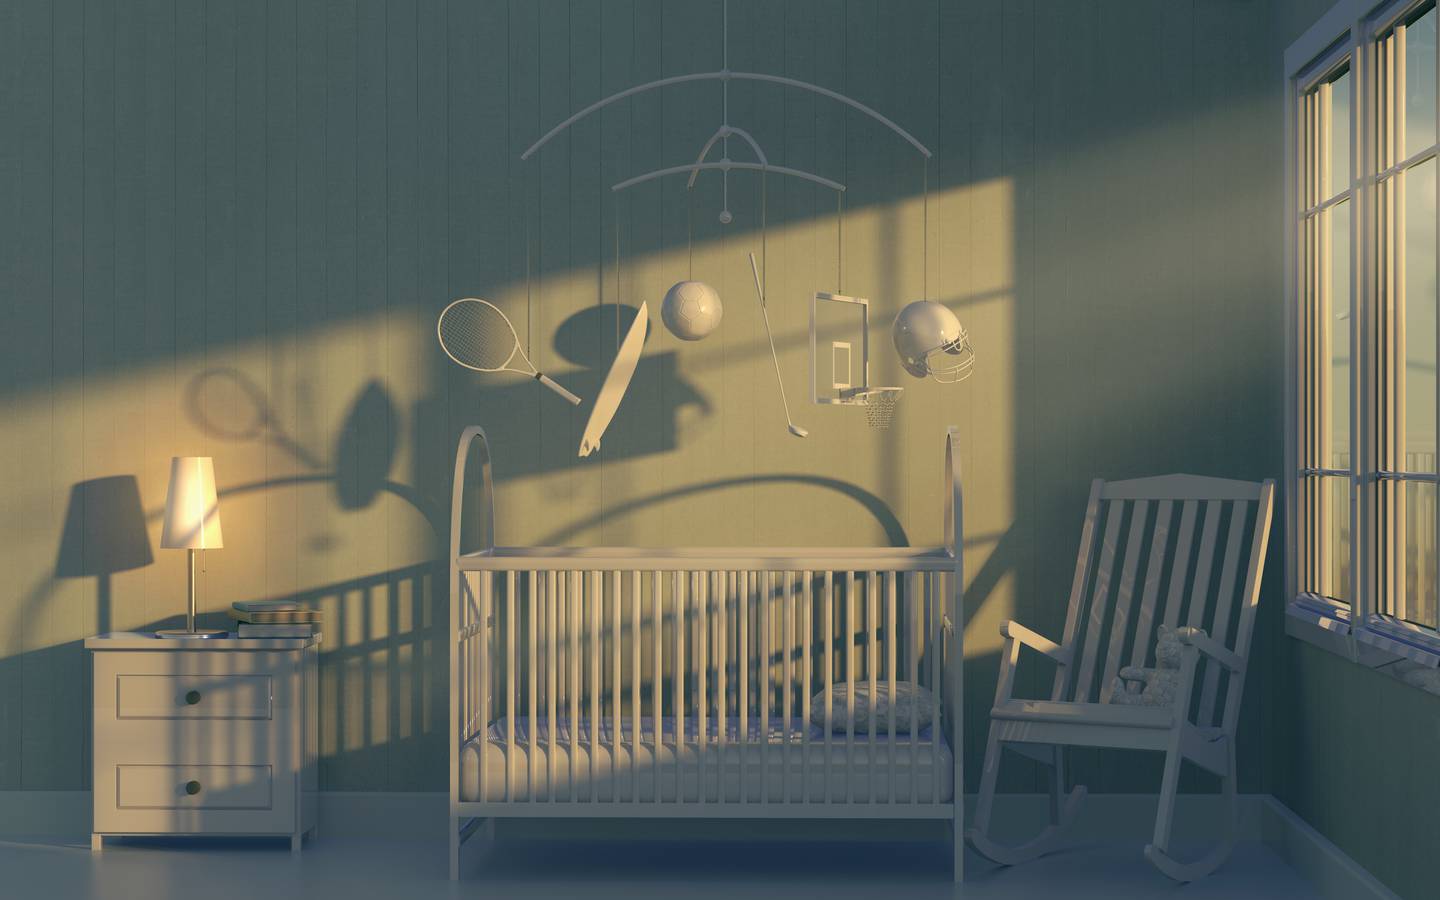 Baby room with mobile made up of sporting equipment over cot